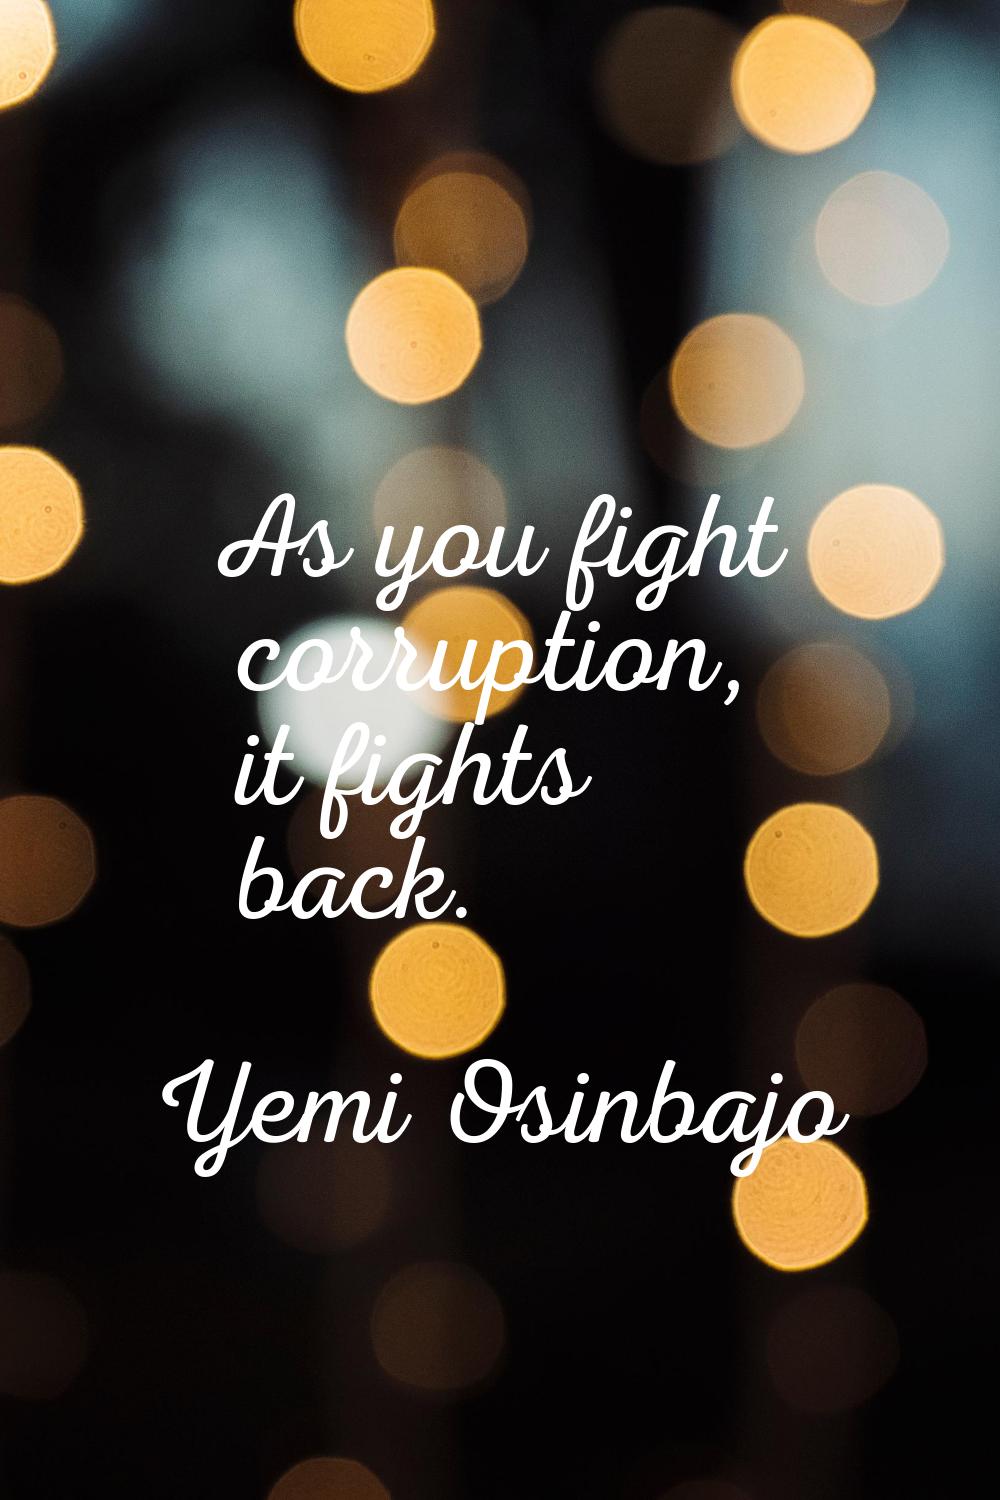 As you fight corruption, it fights back.